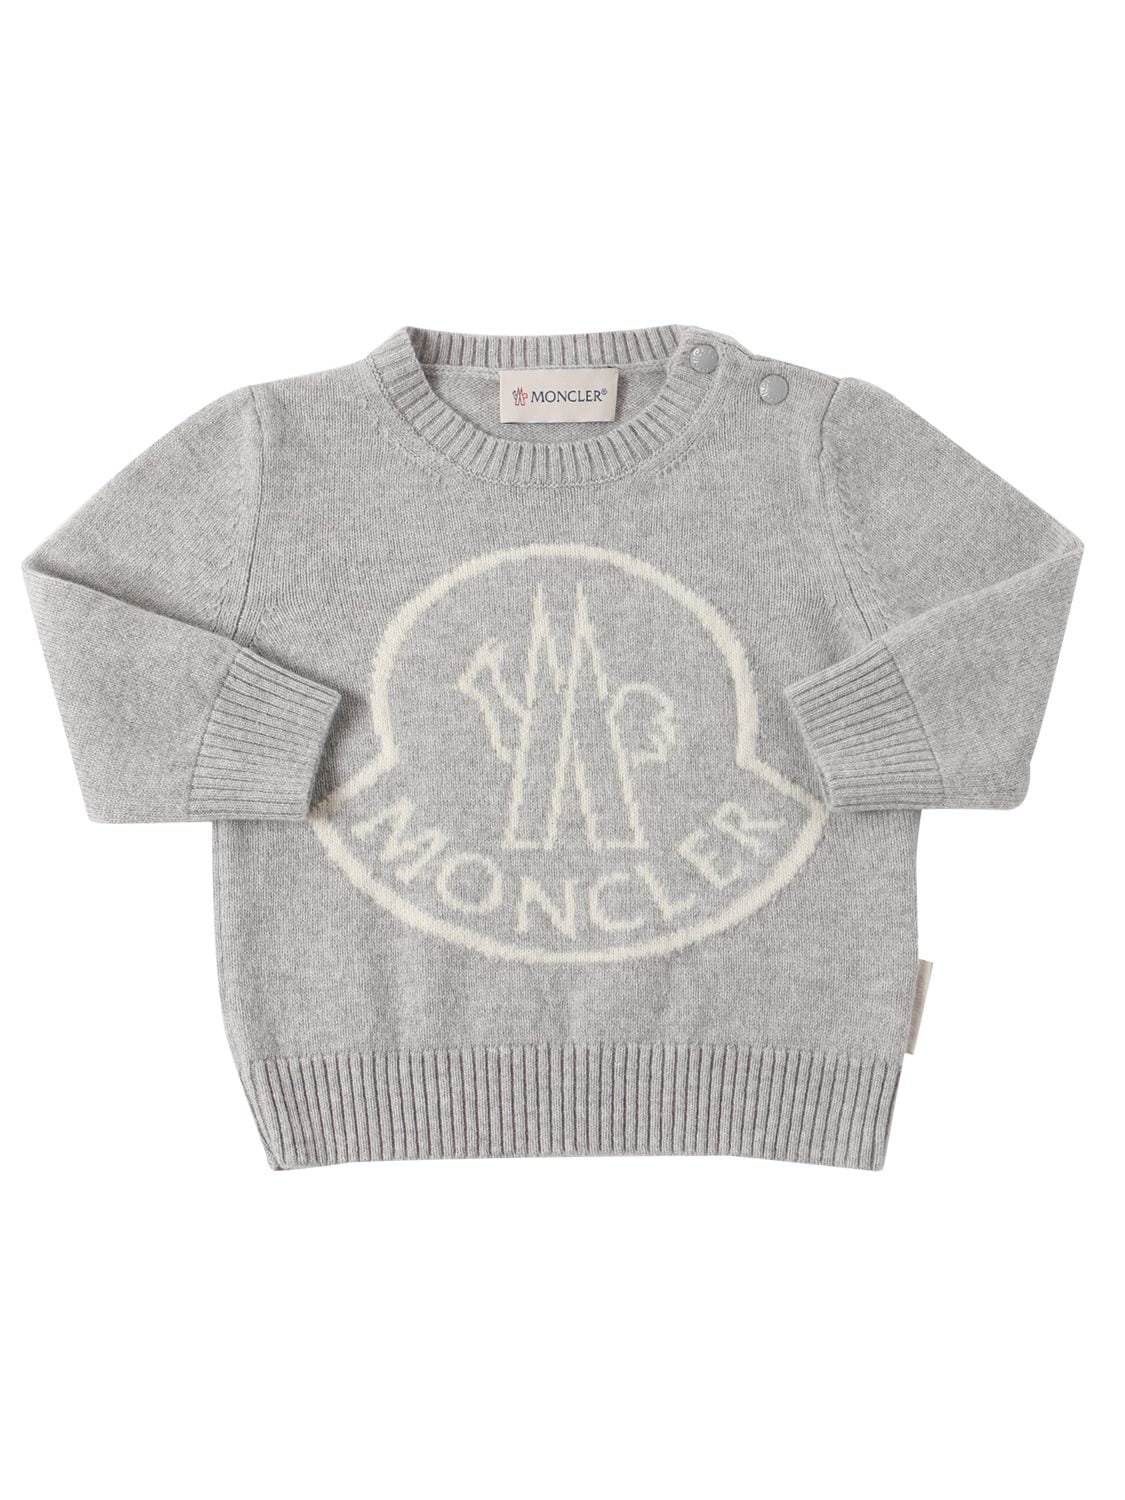 Moncler Kids' Wool & Cashmere Sweater In Grey